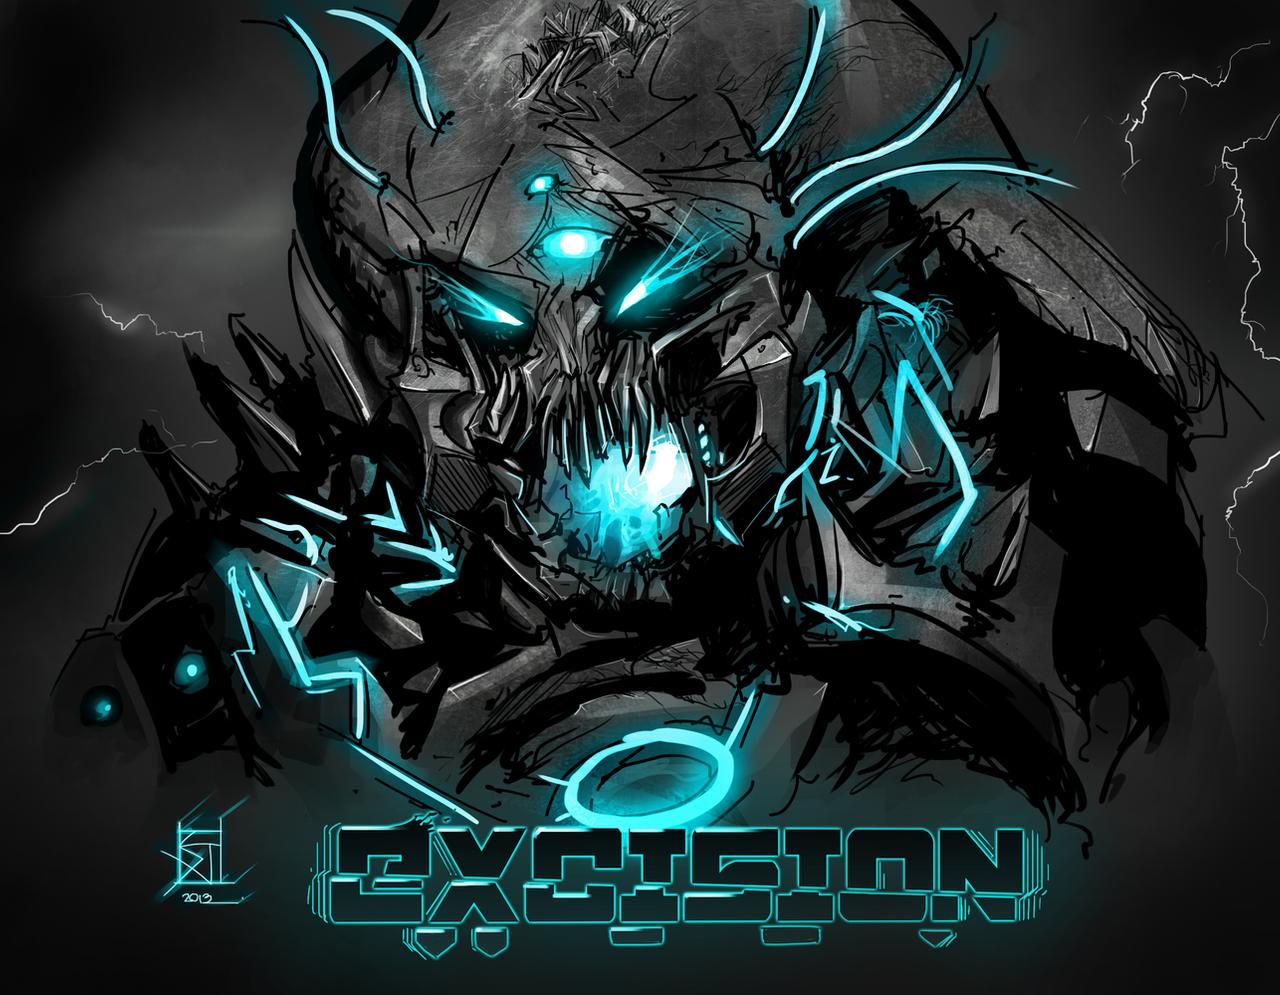 Excision Background. Excision Wallpaper